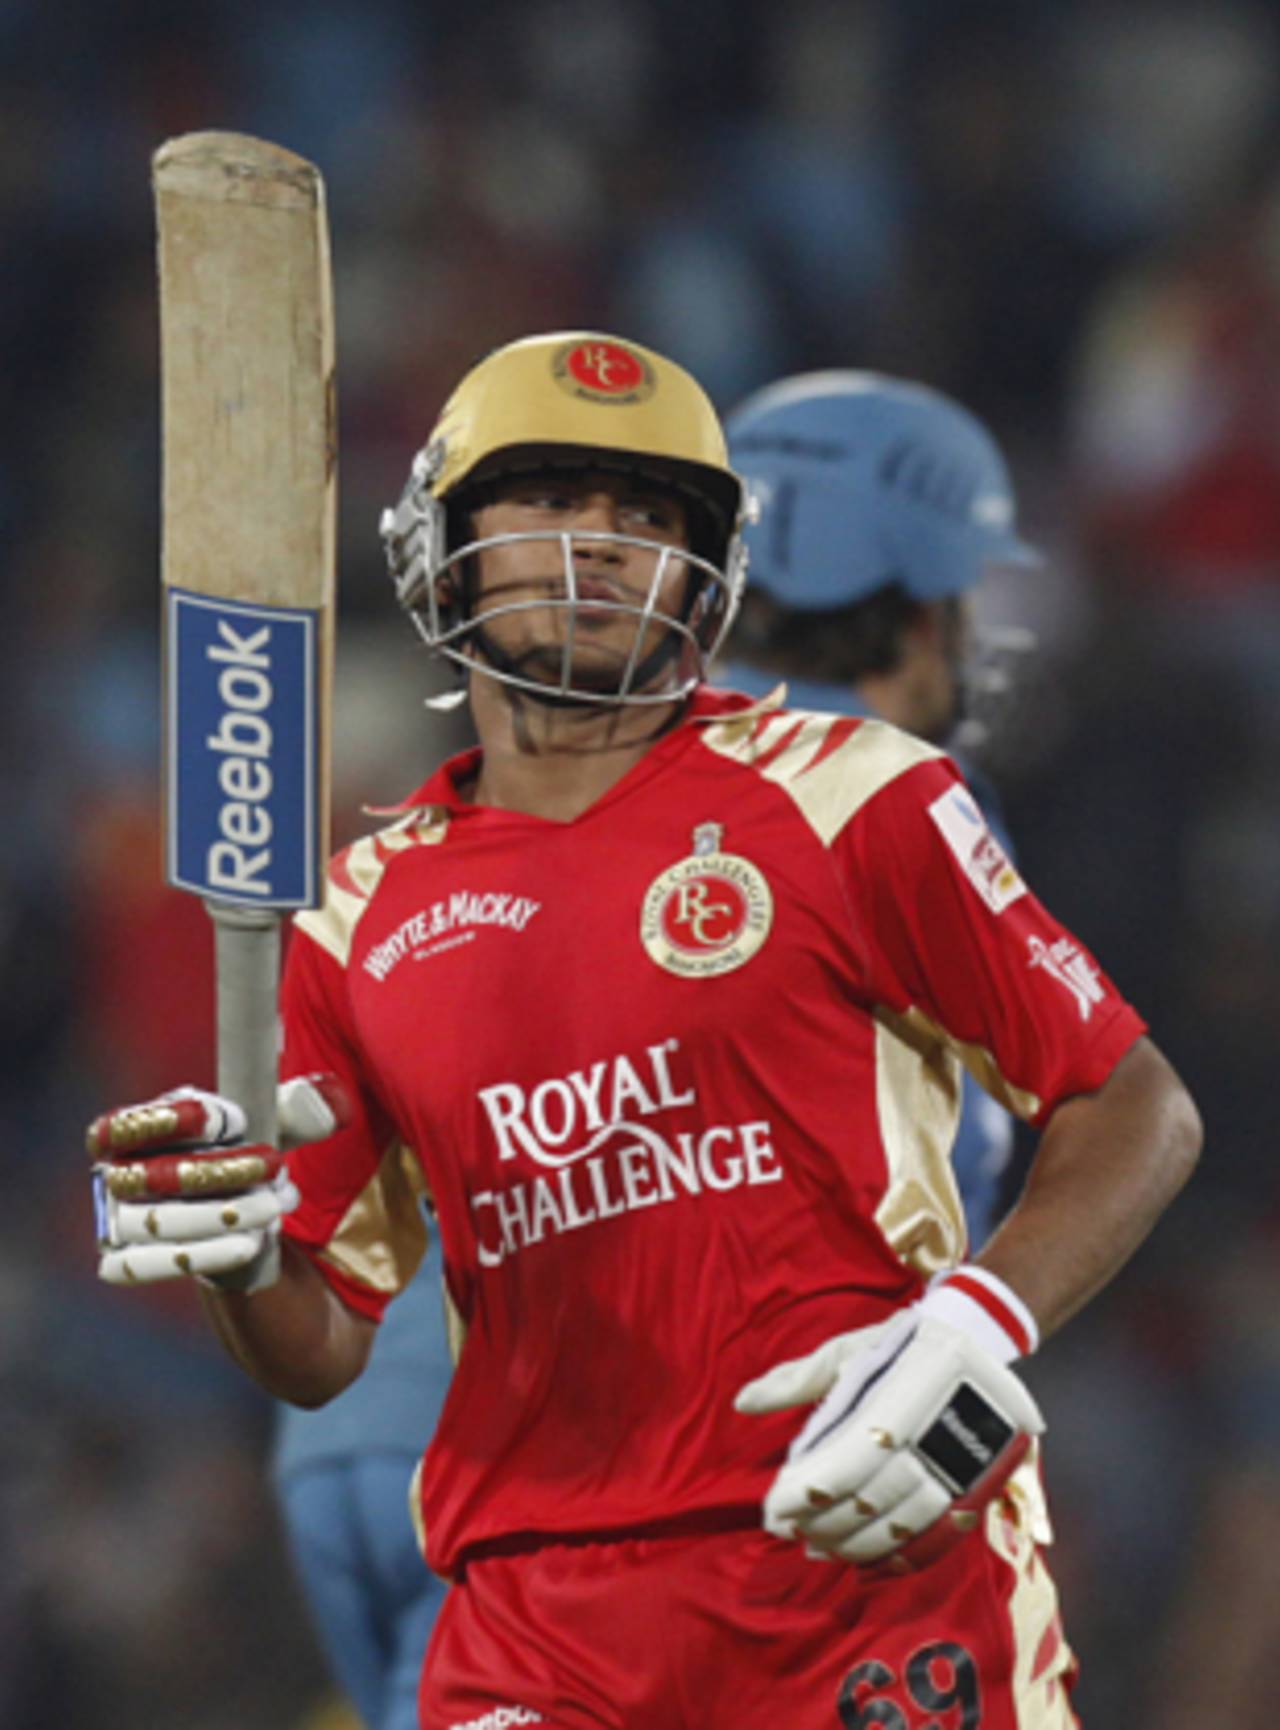 Manish Pandey brings up his hundred, Royal Challengers Bangalore v Deccan Chargers, IPL, 56th match, Centurion, May 21, 2009